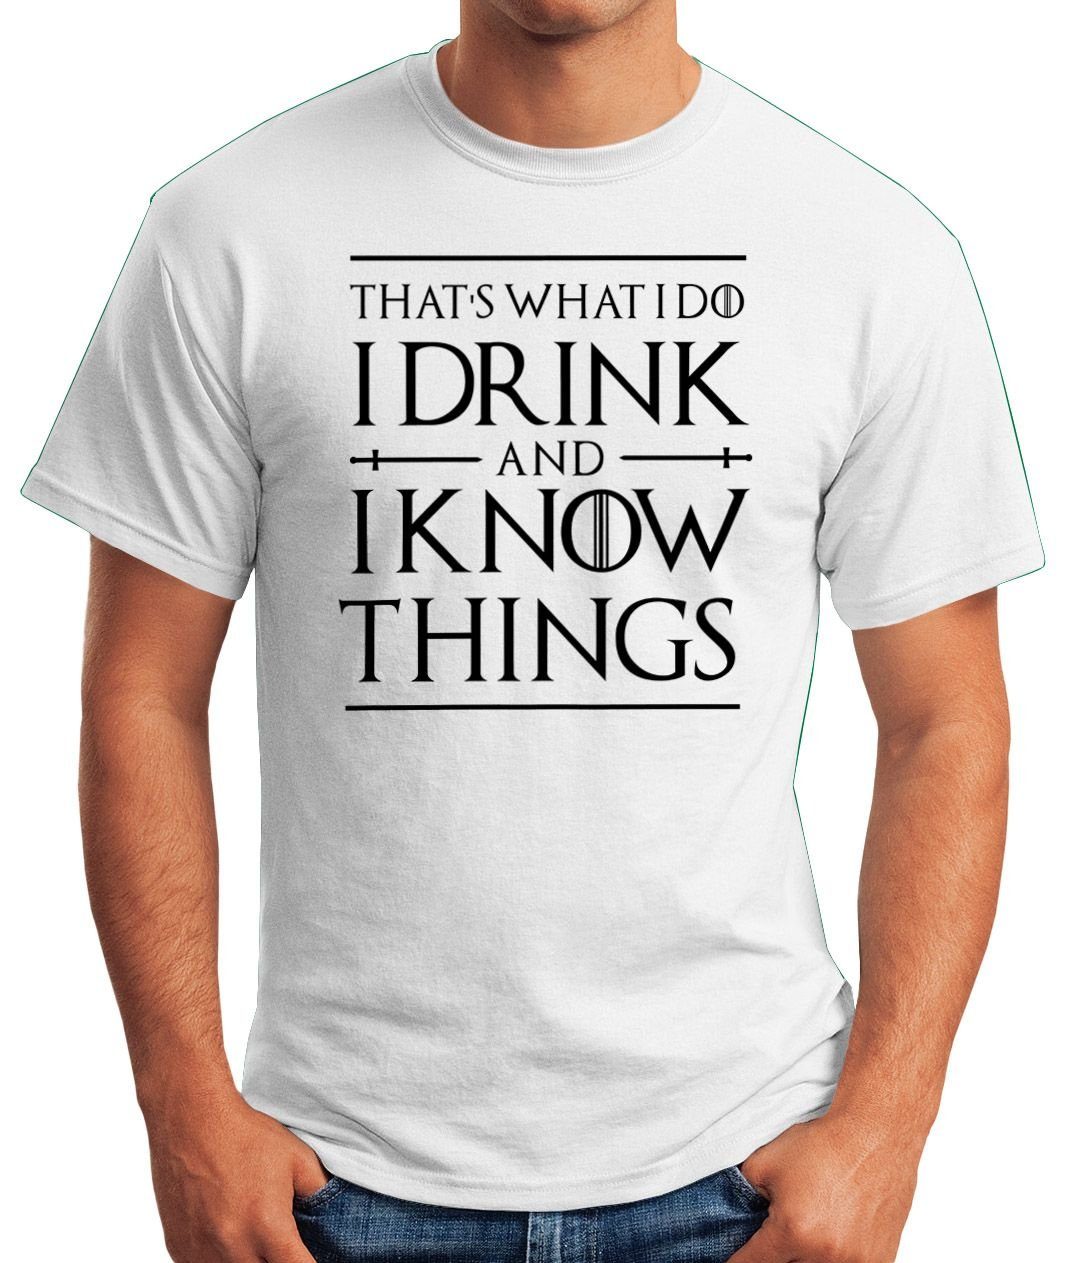 Spruch do Herren that's Moonworks® drink T-Shirt Print what know mit I things i i and MoonWorks Print-Shirt